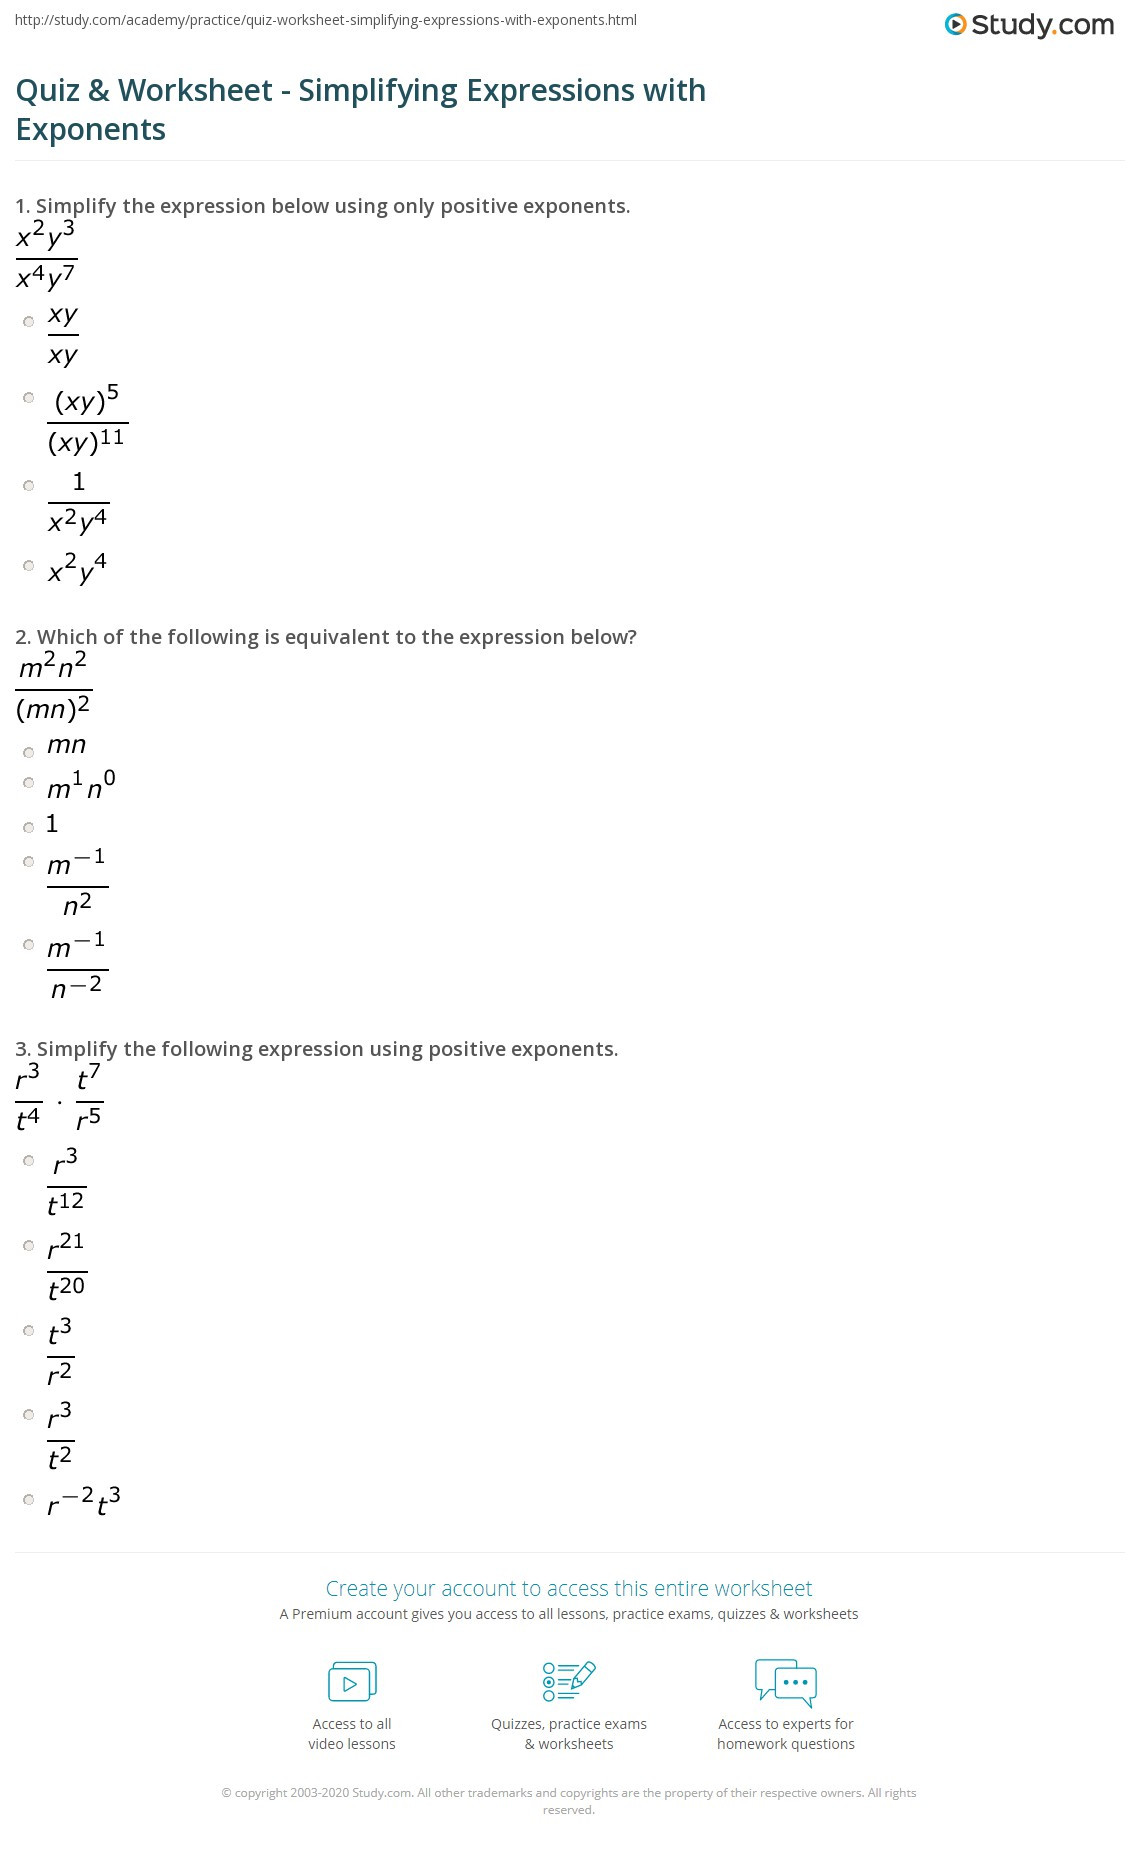 Simplify Exponential Expressions Worksheet Quiz &amp; Worksheet Simplifying Expressions with Exponents